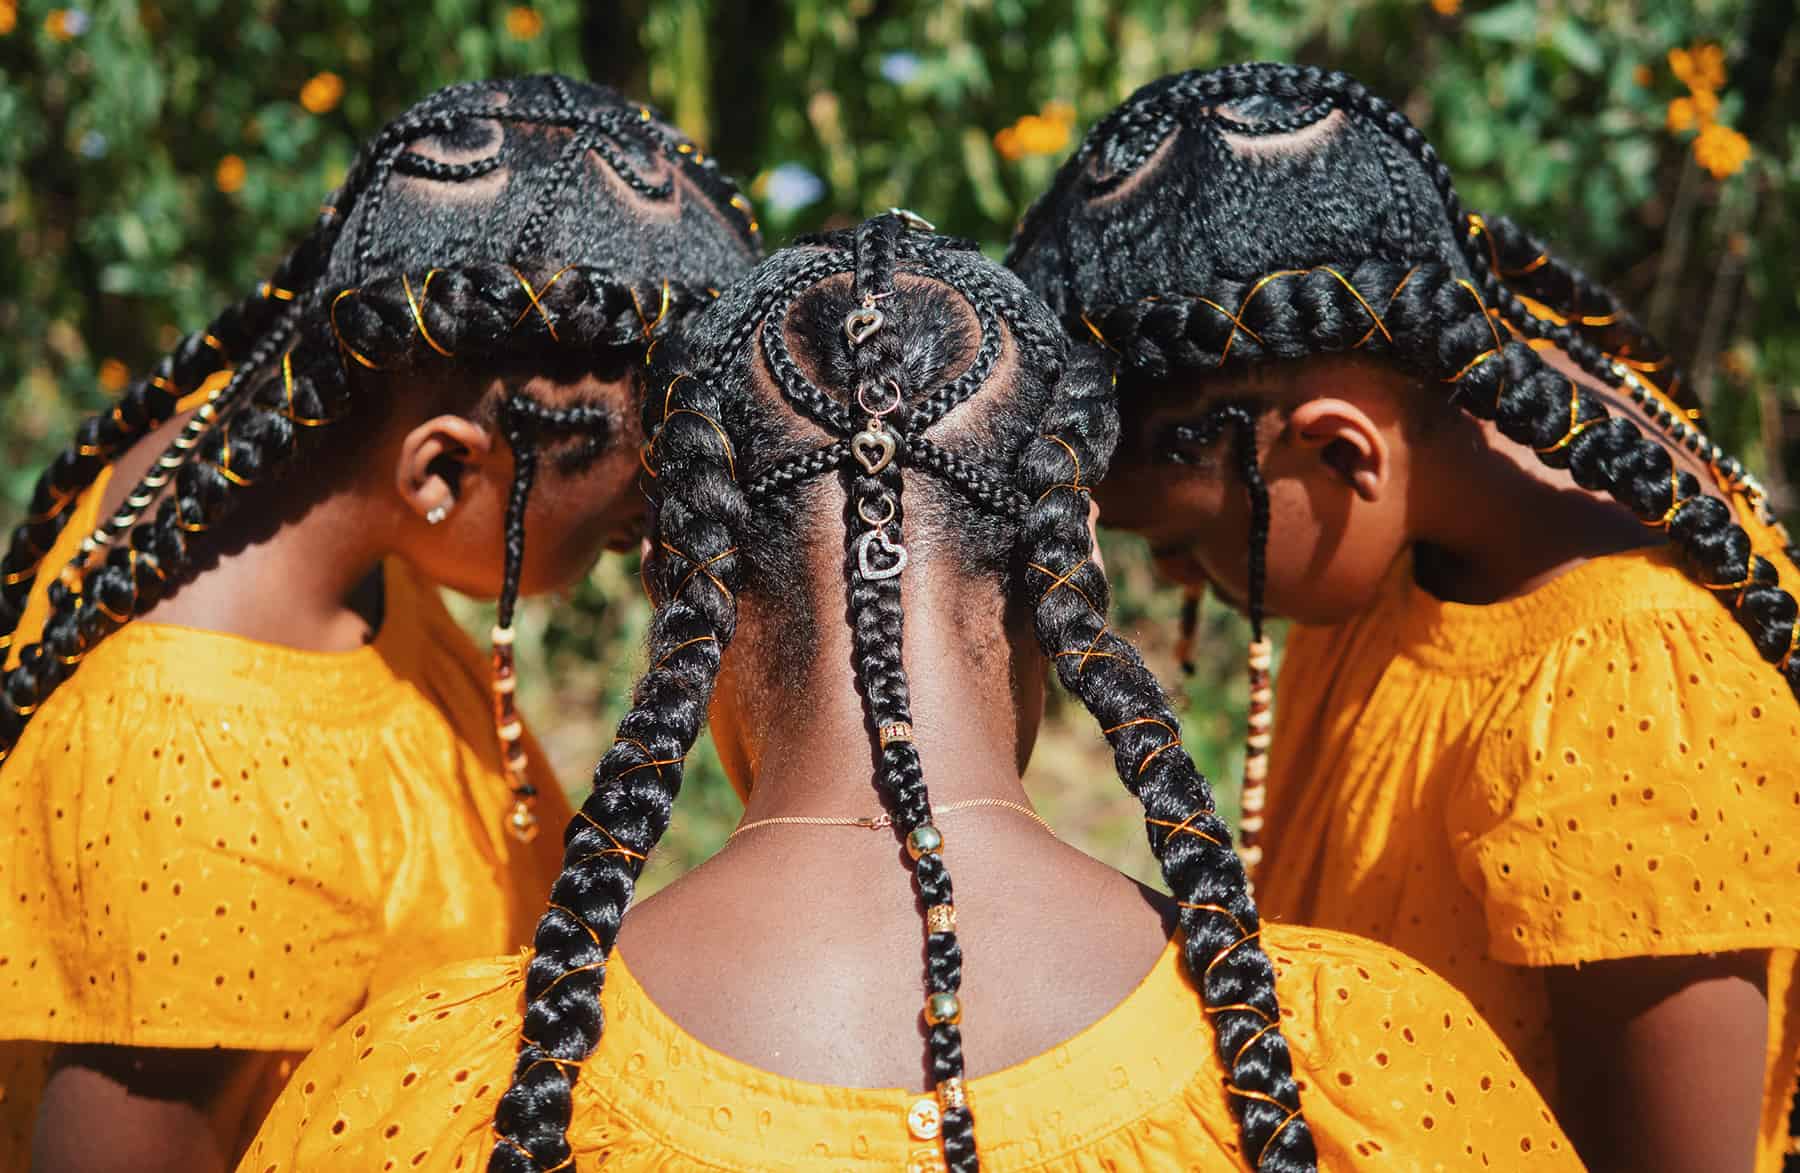 The top and back of 3 young Black women's heads are shown elaborately braided